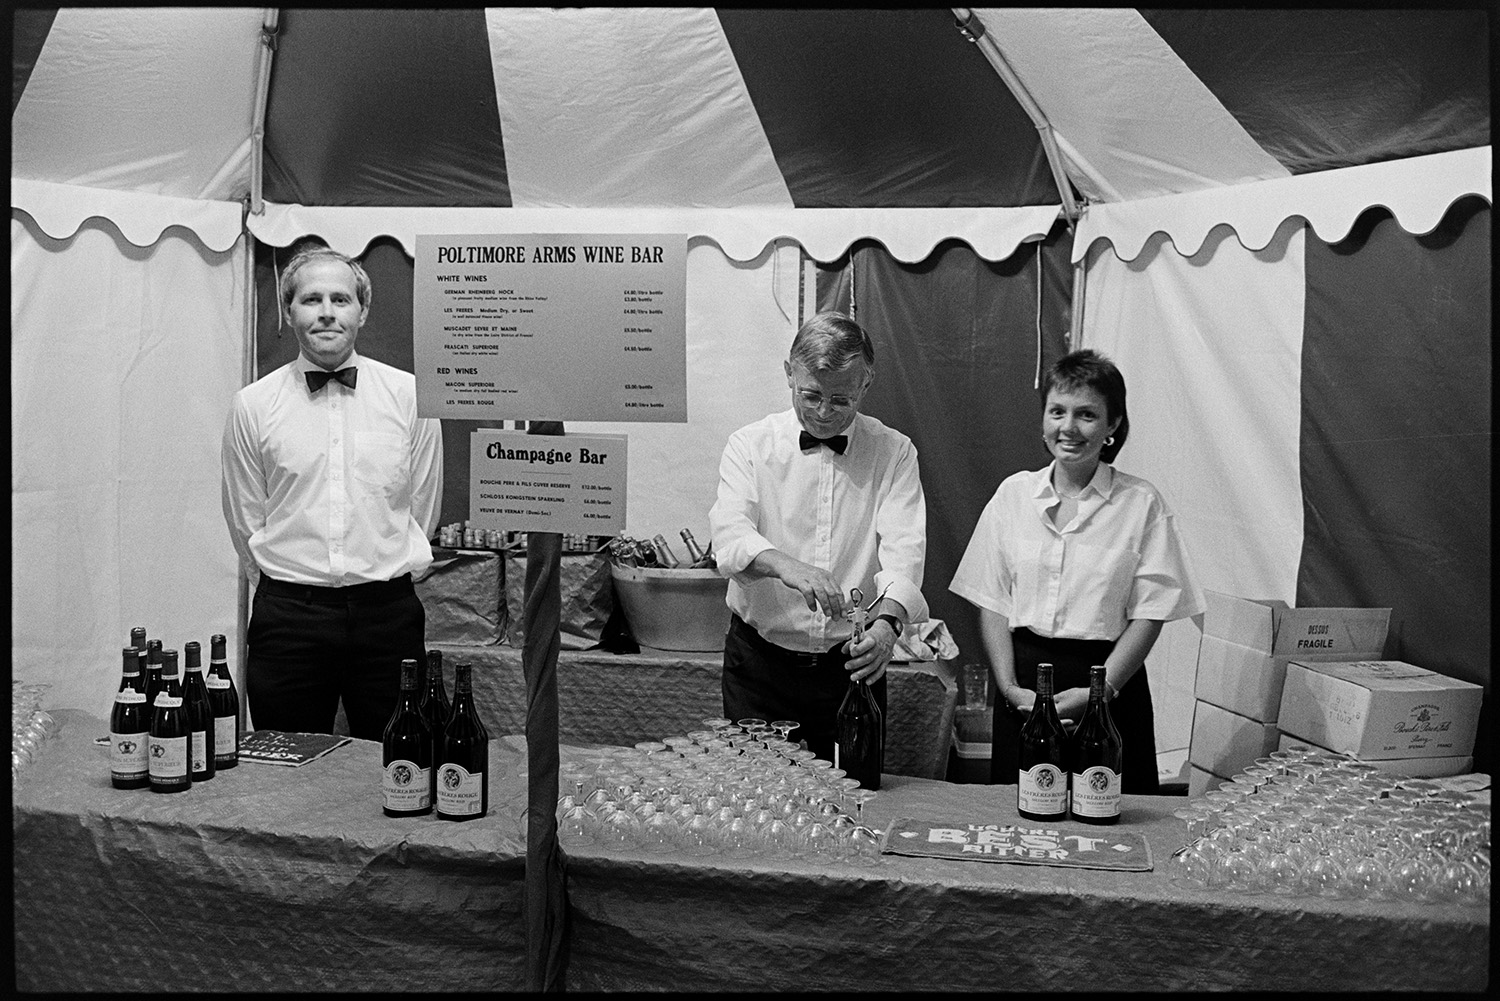 Hunt ball tents marquee, night with candles, people at bar, and arriving, disco lorry.
[Staff standing at the Poltimore Arms Wine Bar in a marquee for the Eggesford Hunt Ball at Colleton Manor, Chulmleigh. Bottles of wine and glasses are laid out on the table in front of the staff.]